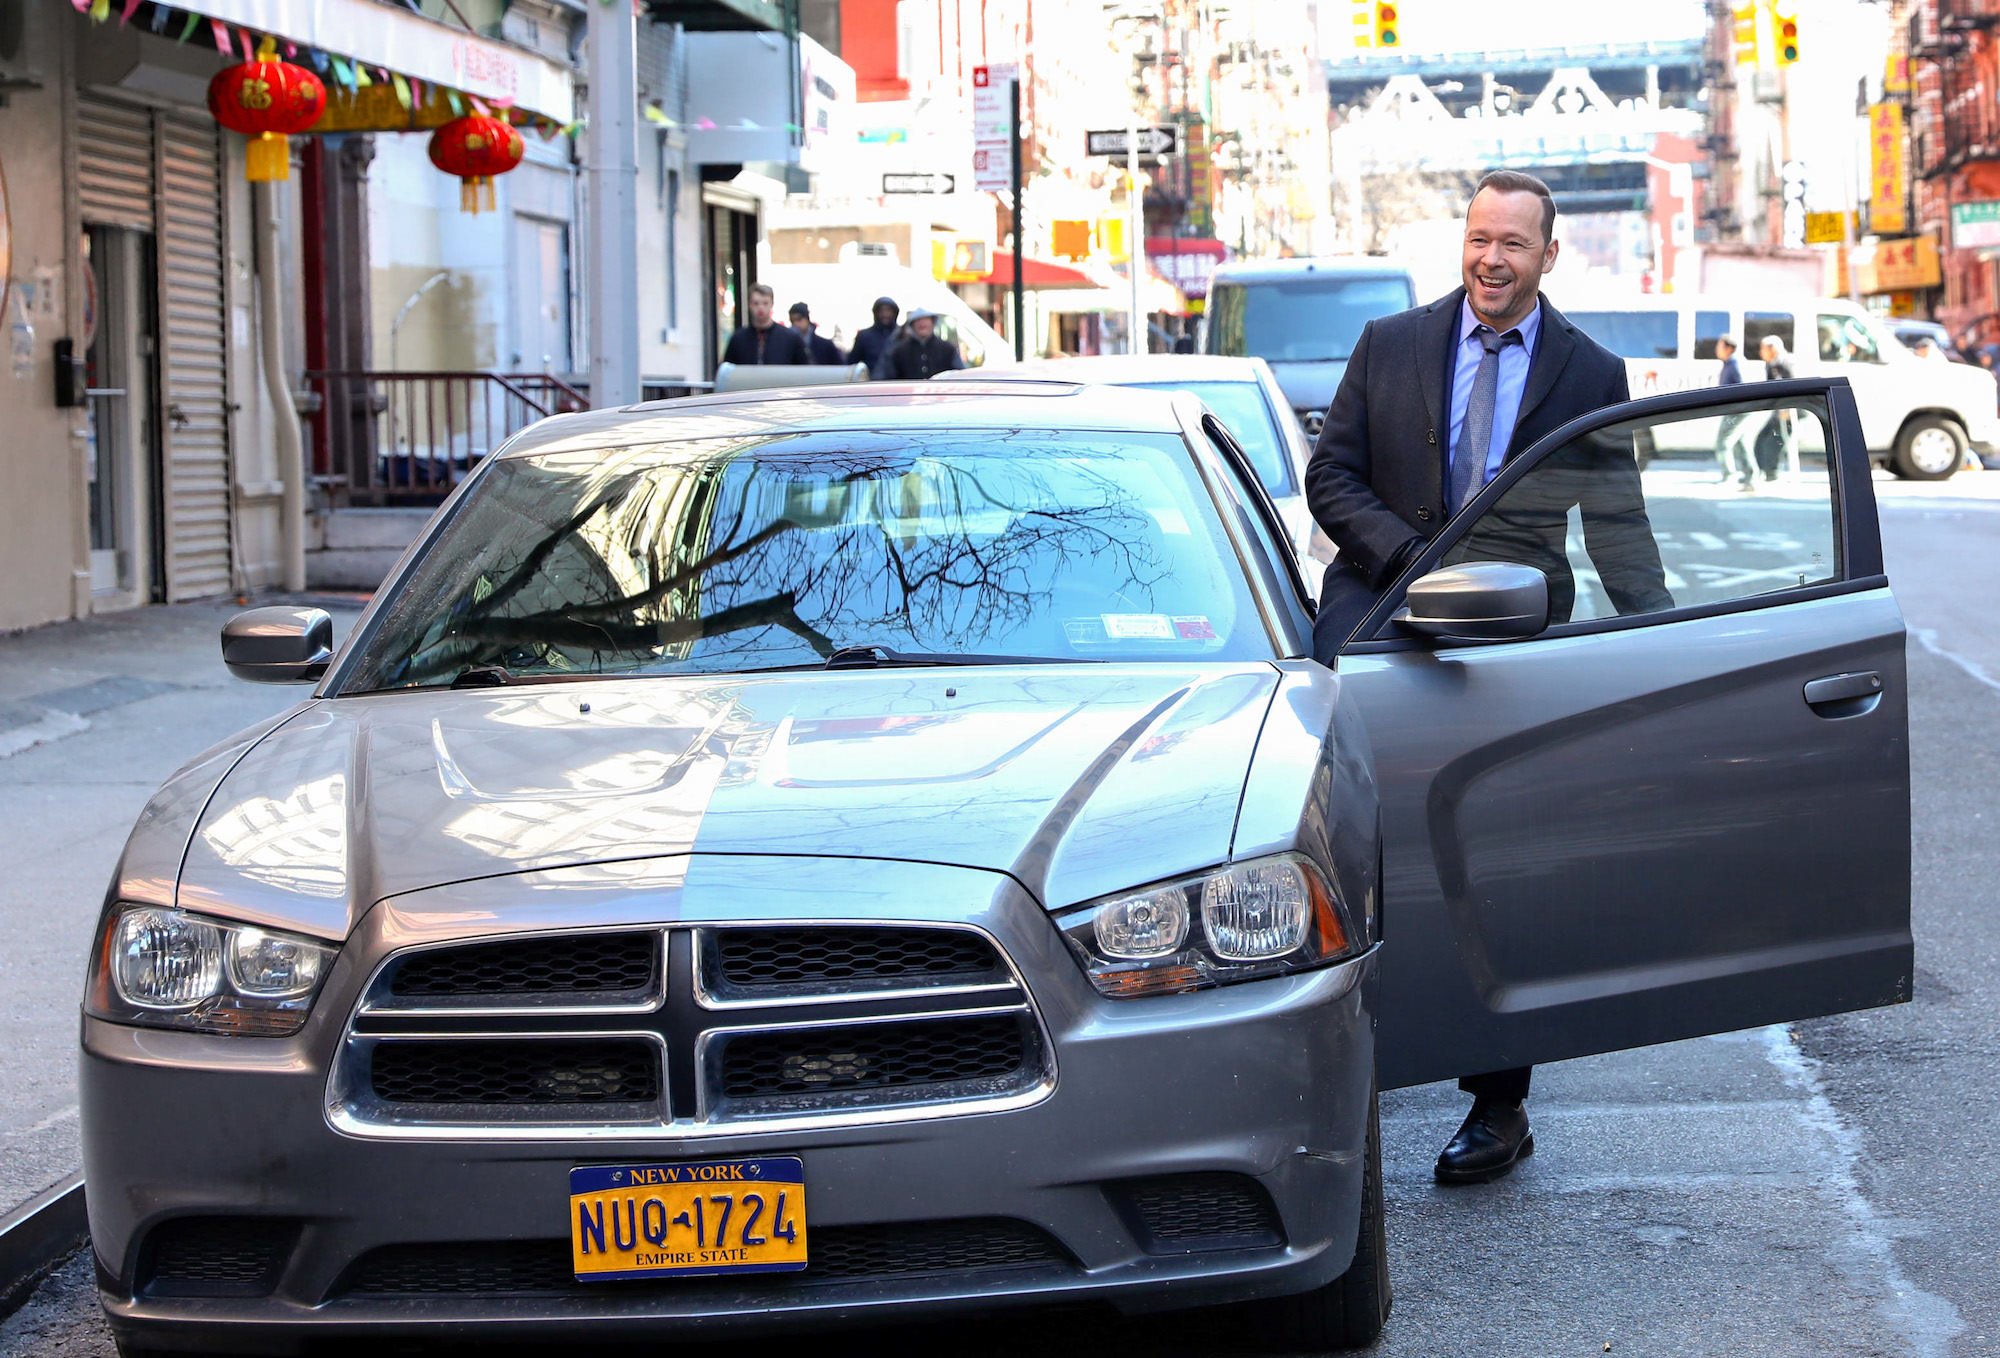 Donnie Wahlberg getting into a car on 'Blue Bloods'